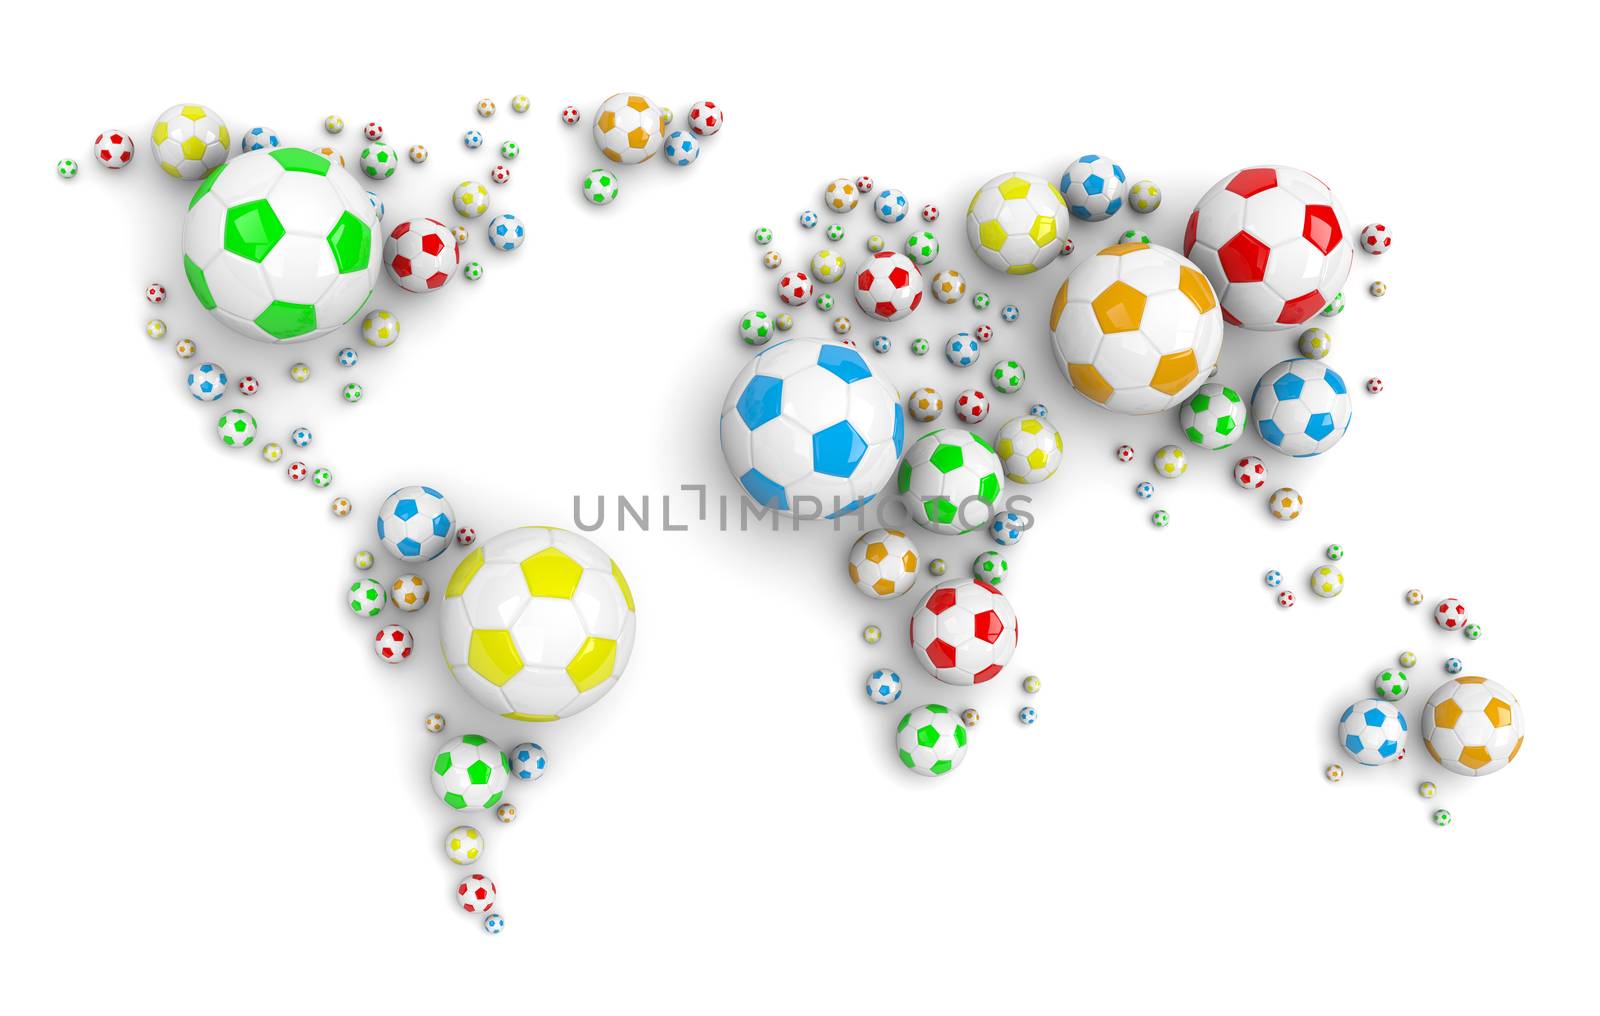 Colorful Soccer Balls Arranged as a World Map on White Background 3D Illustration